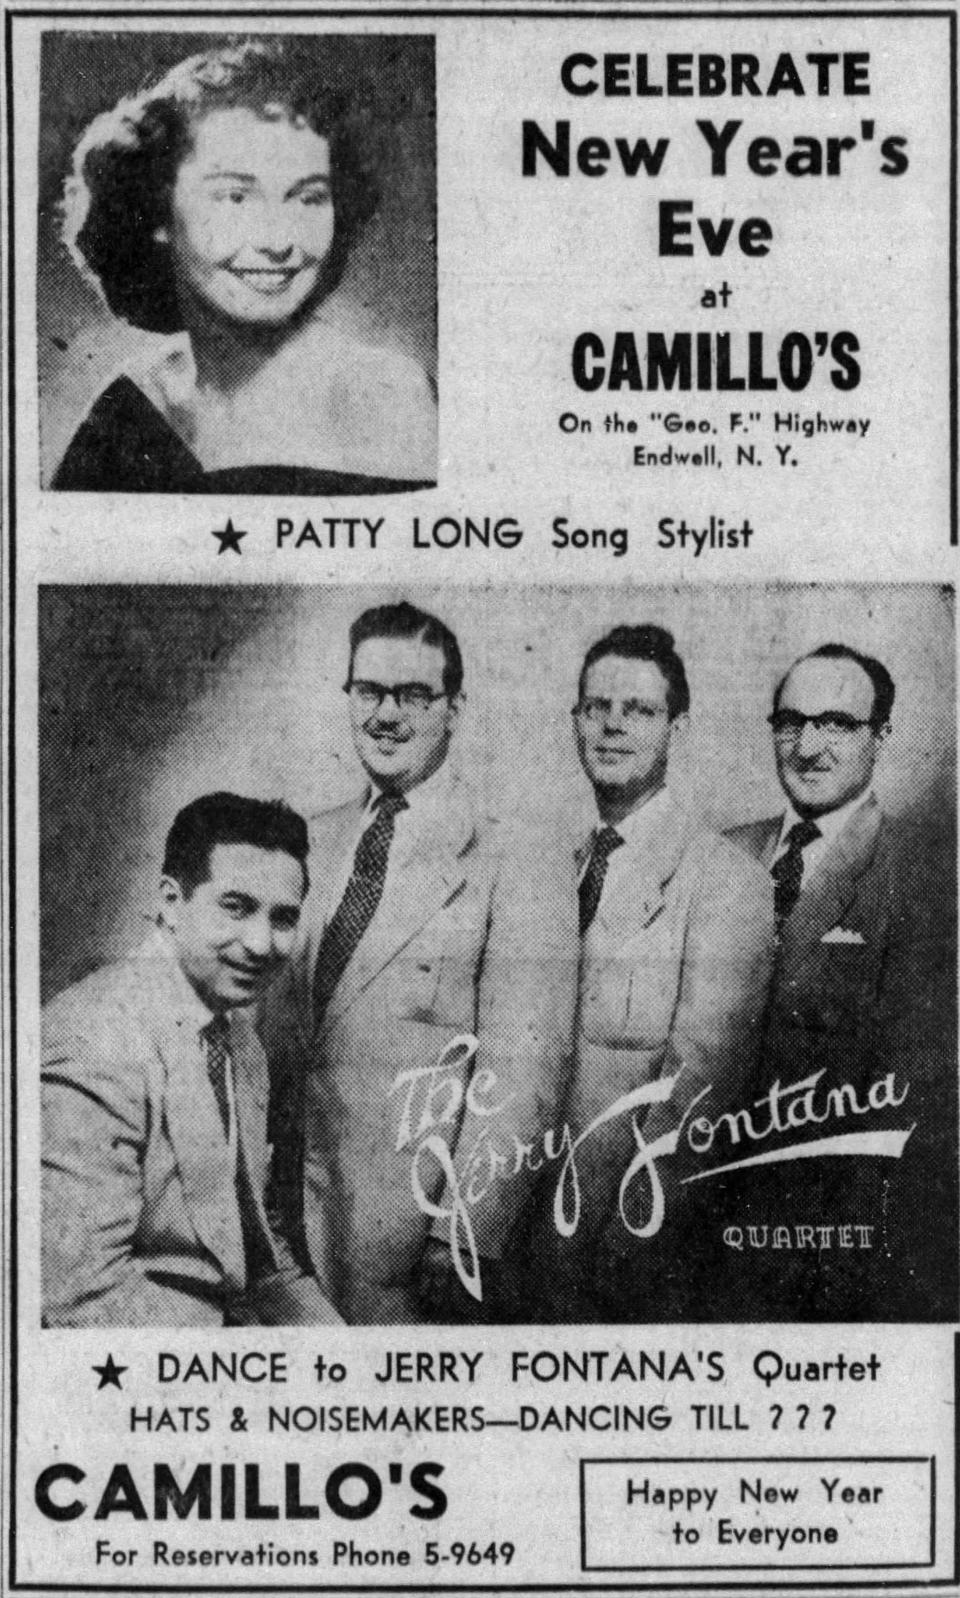 The ad for the Jerry Fontana Quartet performing at Camillo’s in Endicott in 1950.